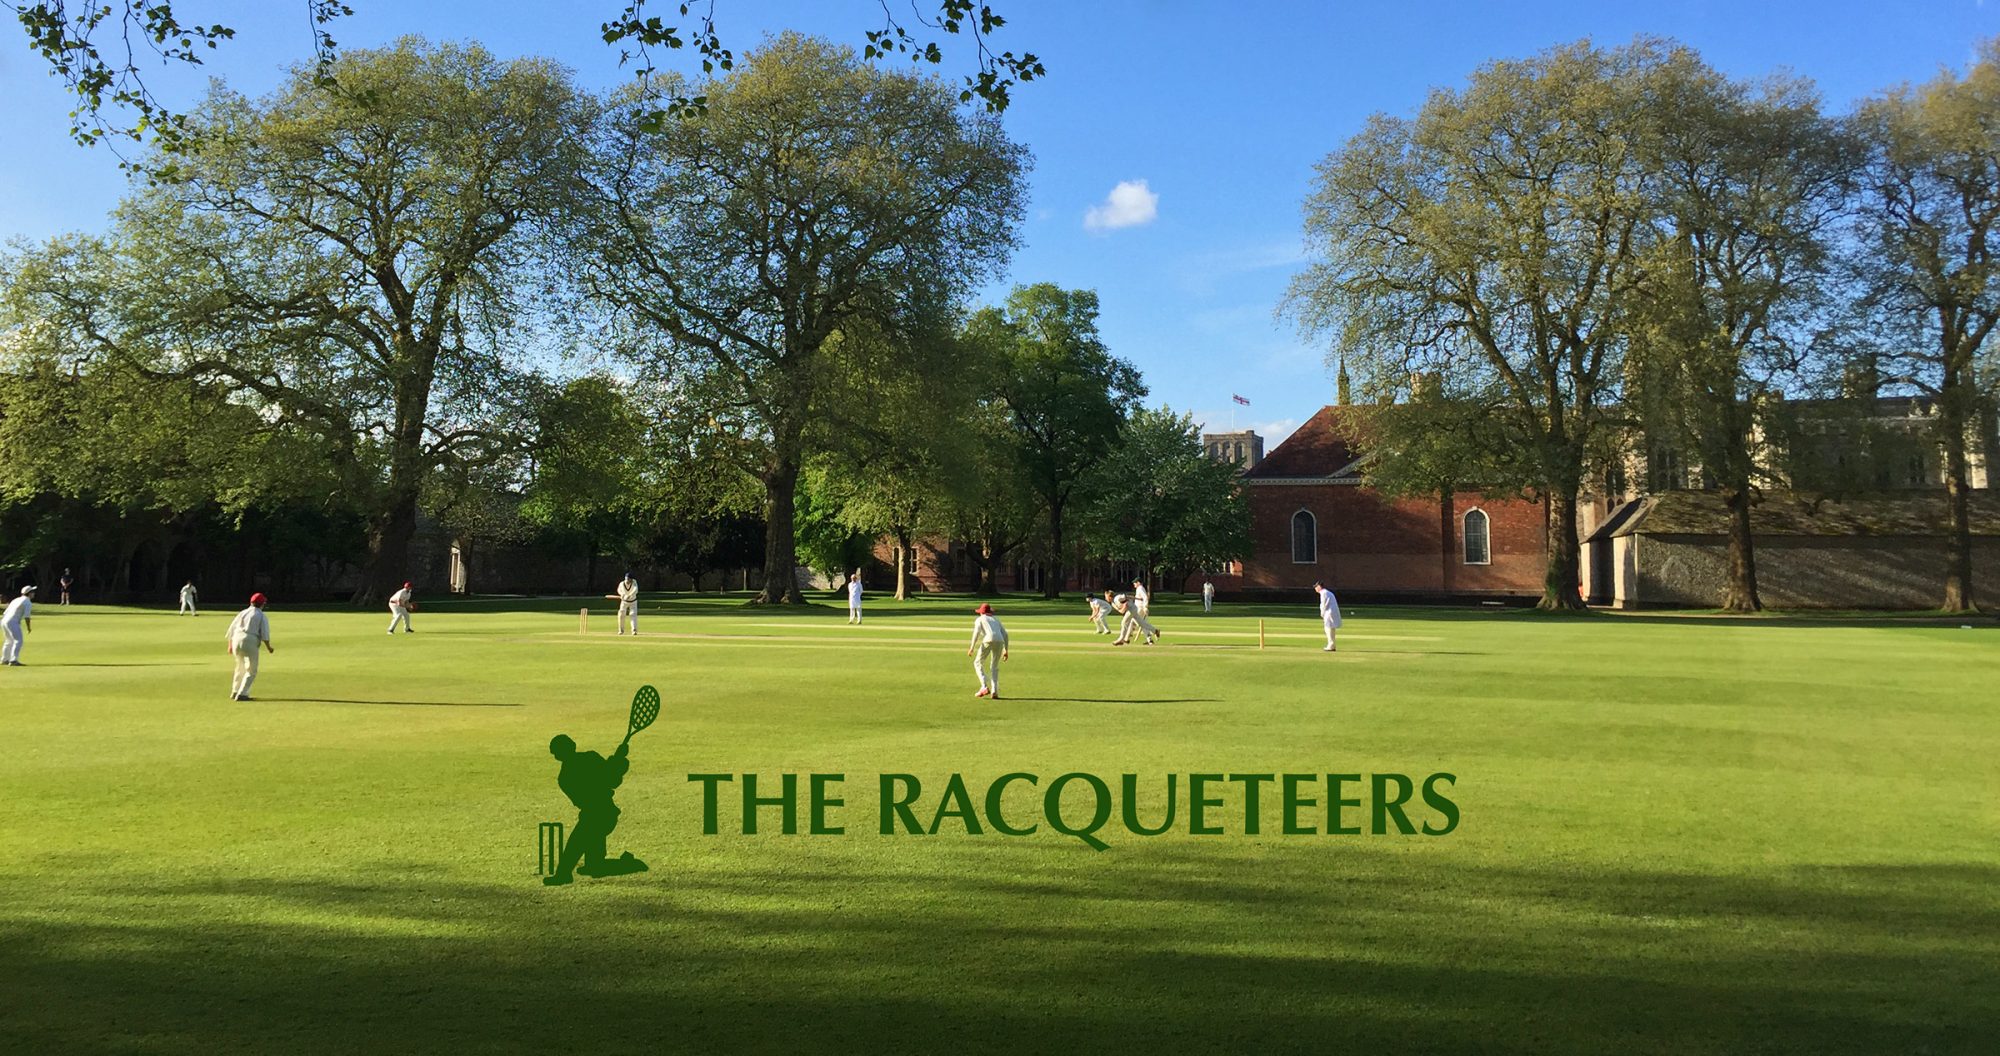 The Racqueteers Cricket Club